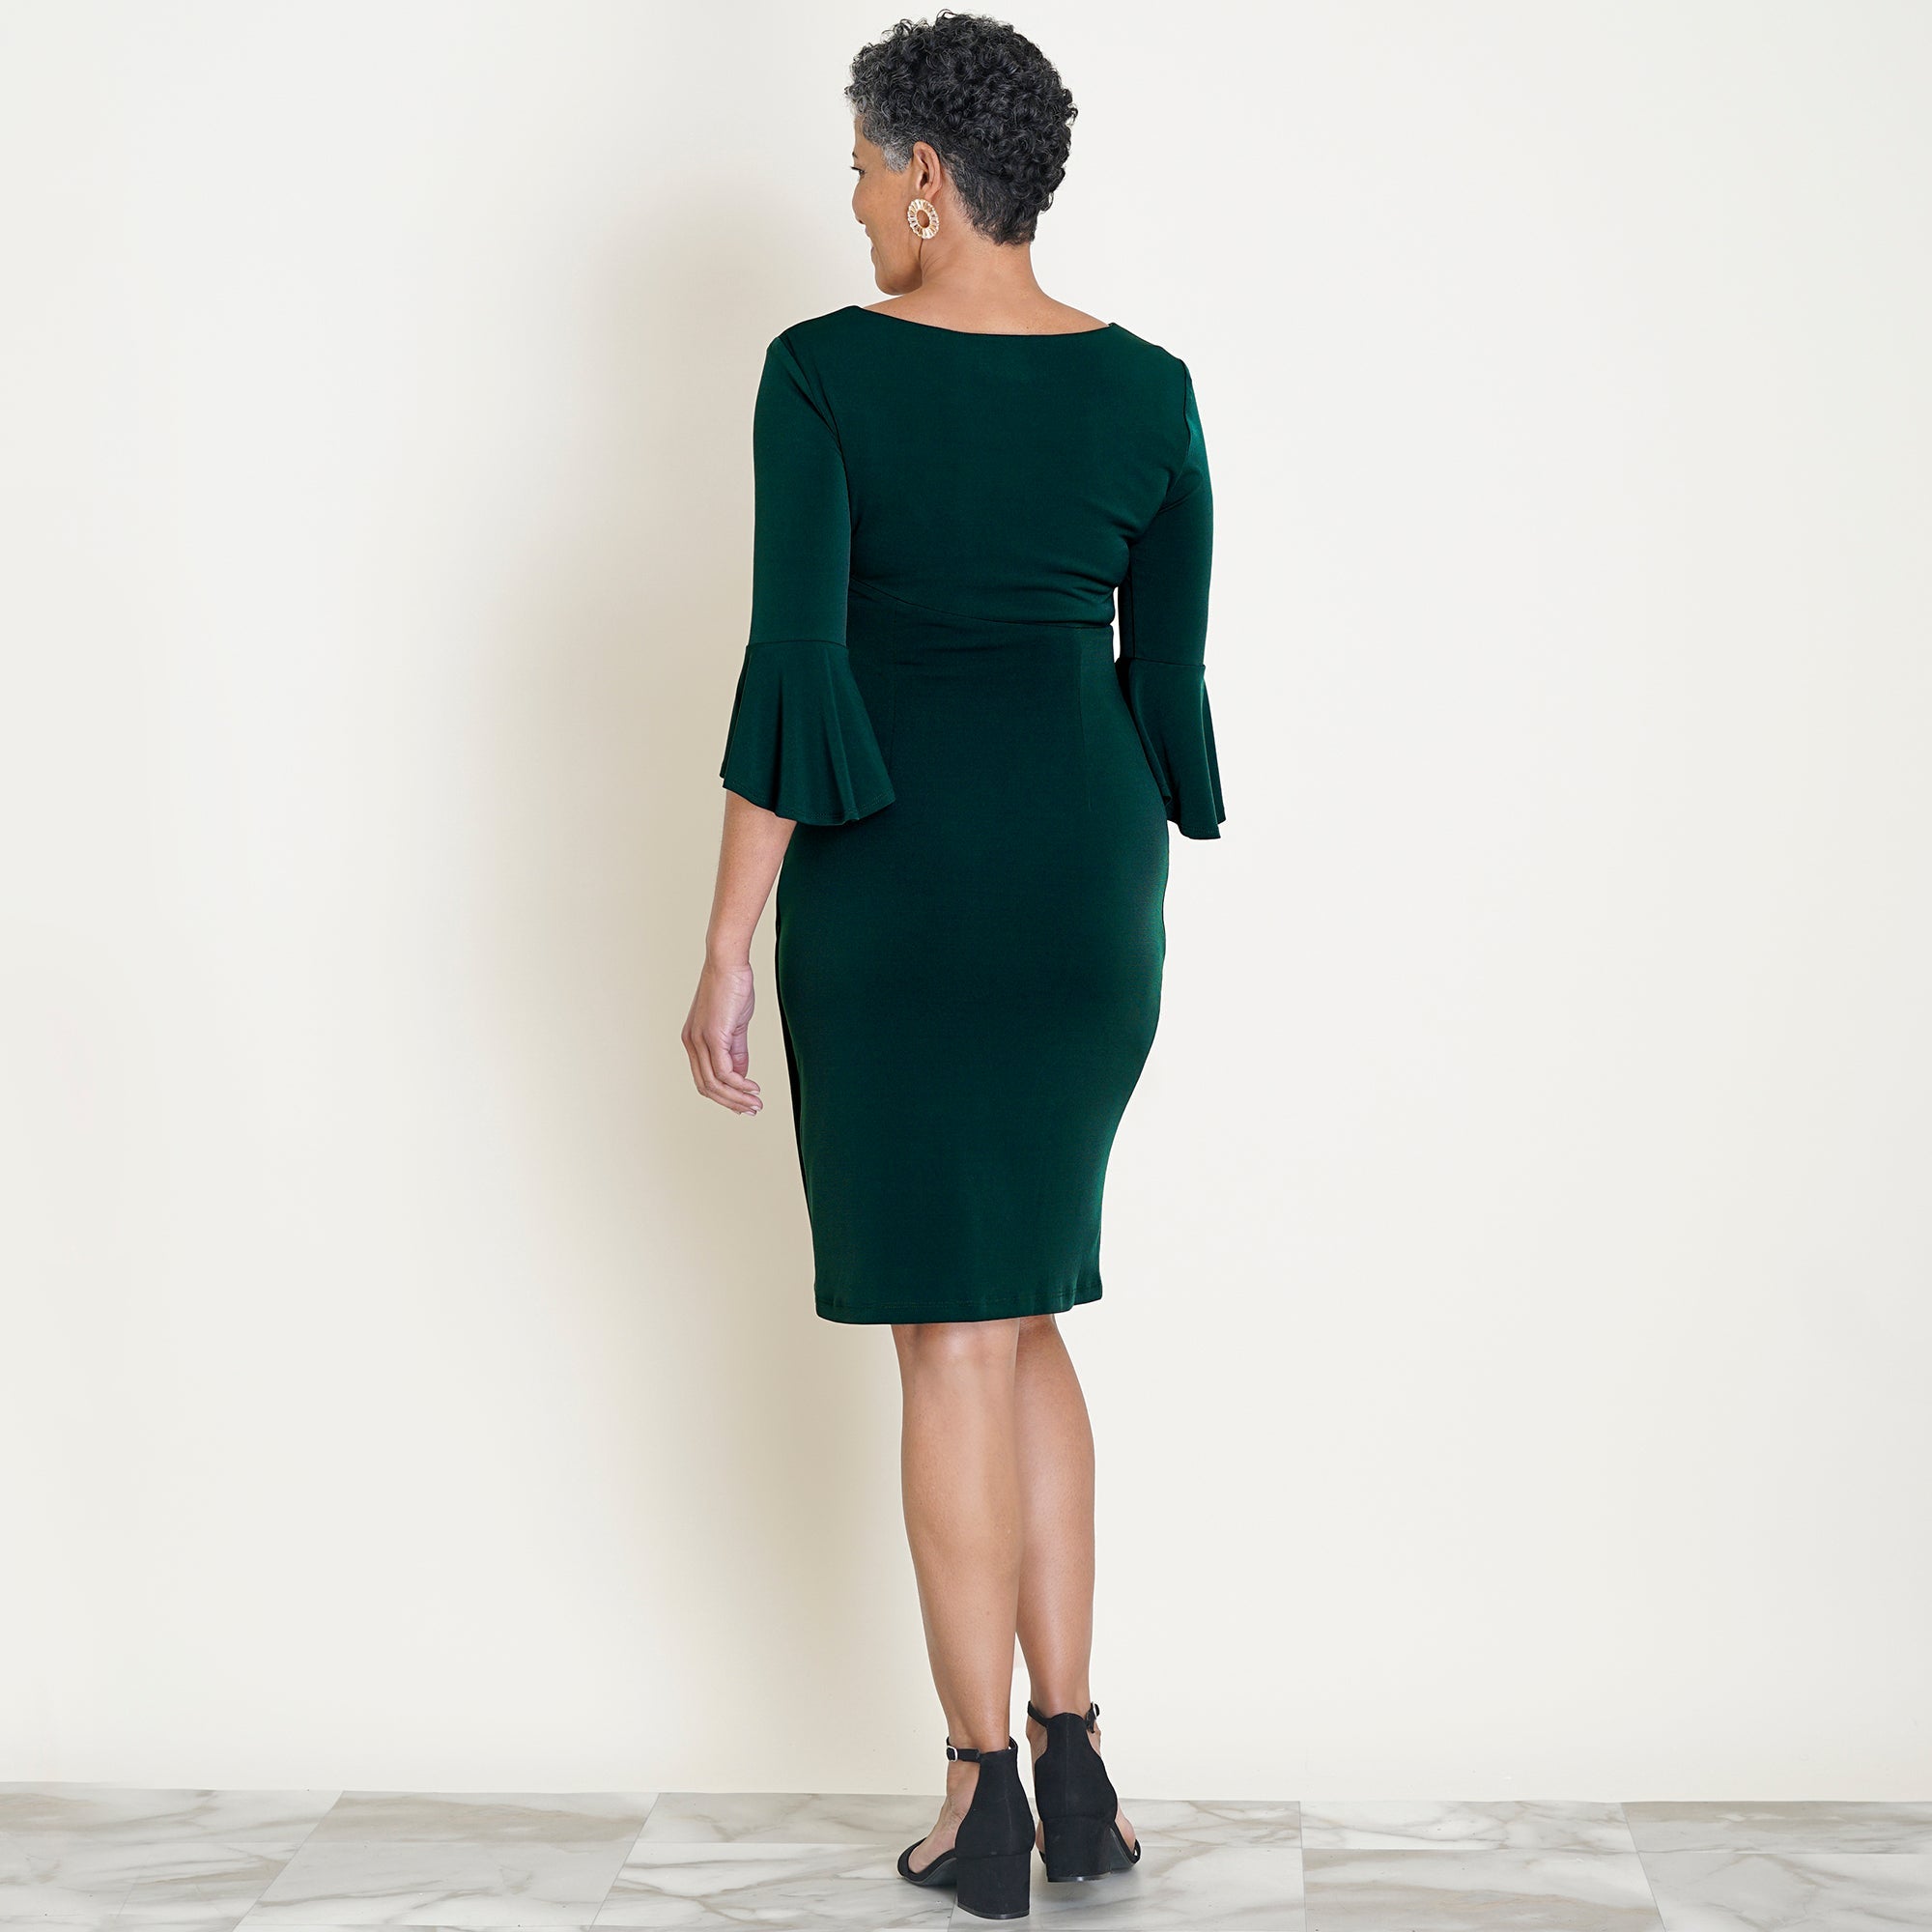 Woman posing wearing Hunter Lisa 2.0 Hunter Green Faux Wrap Dress from Connected Apparel